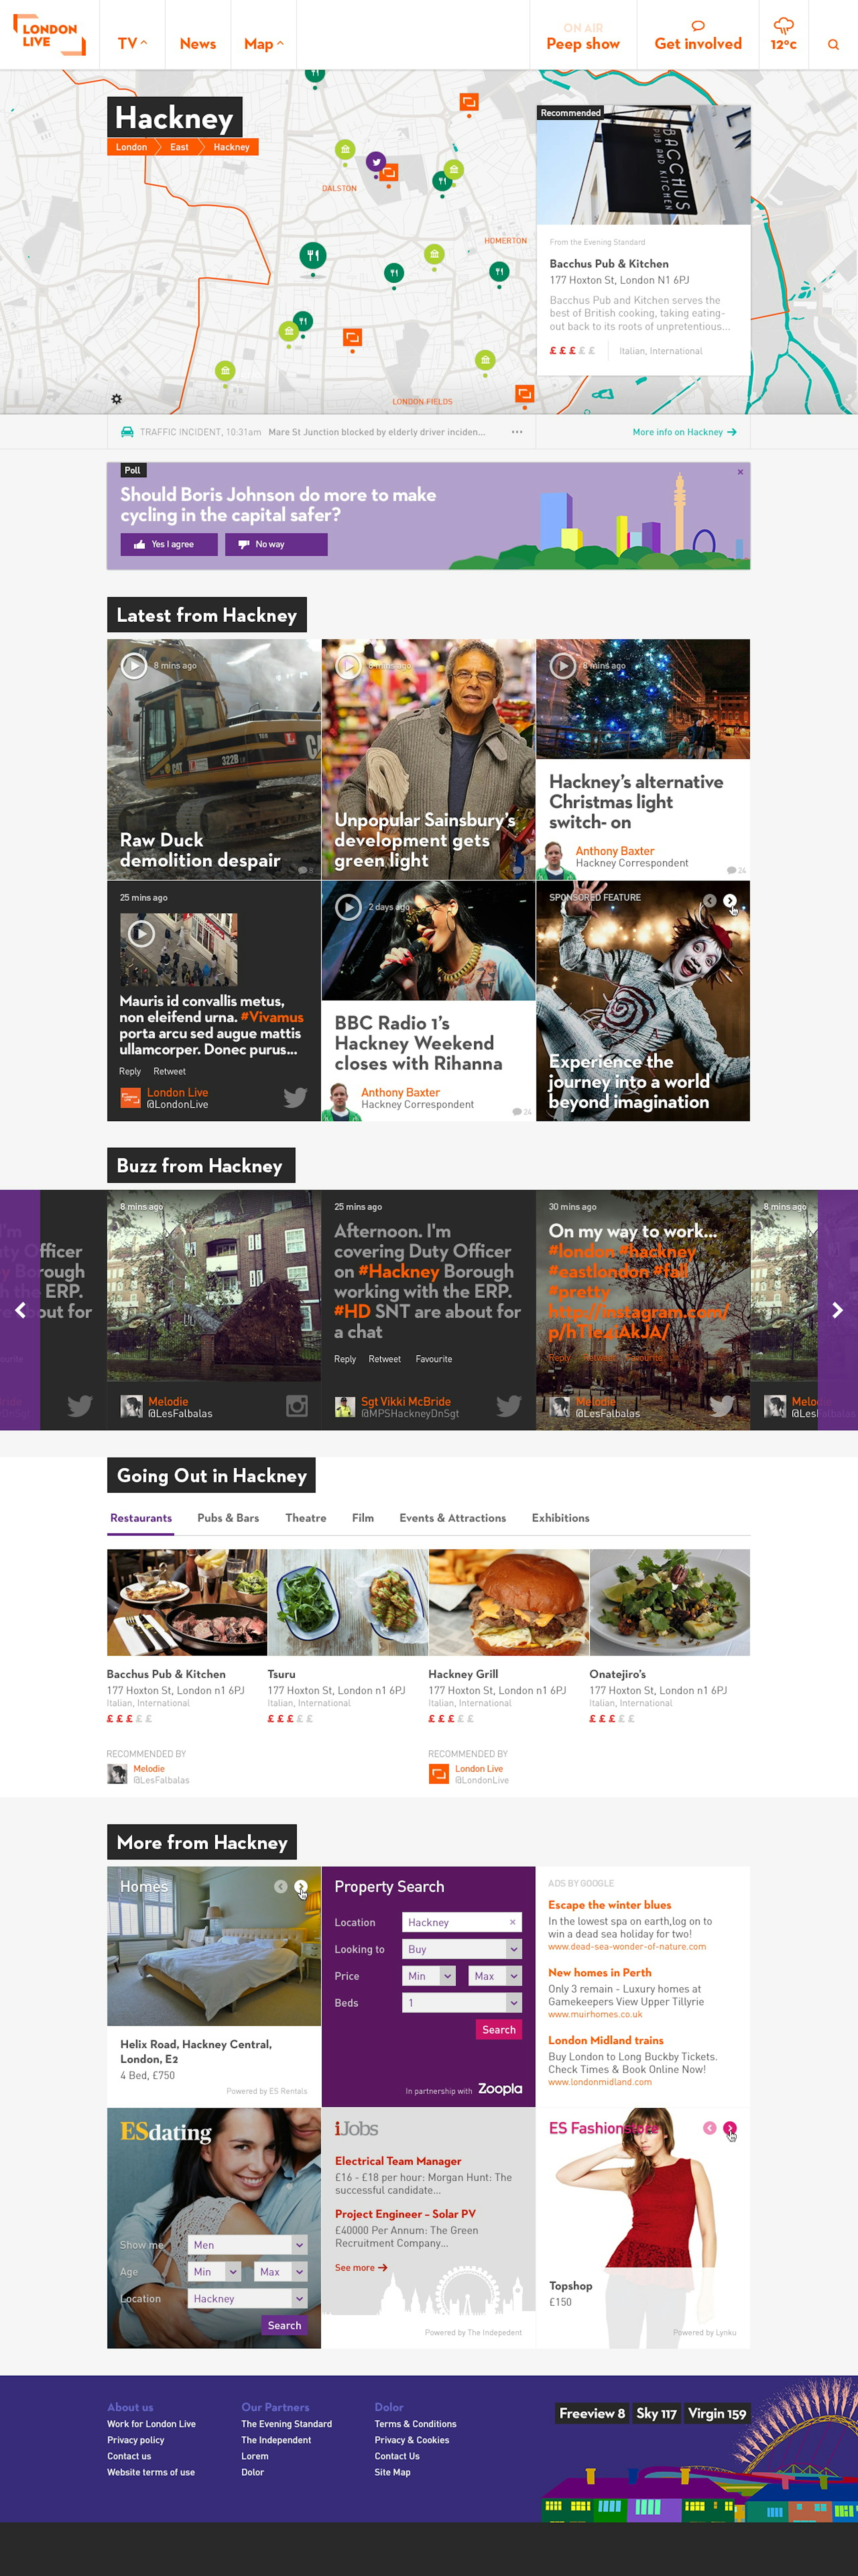 Local pages combine news, events and curated social media